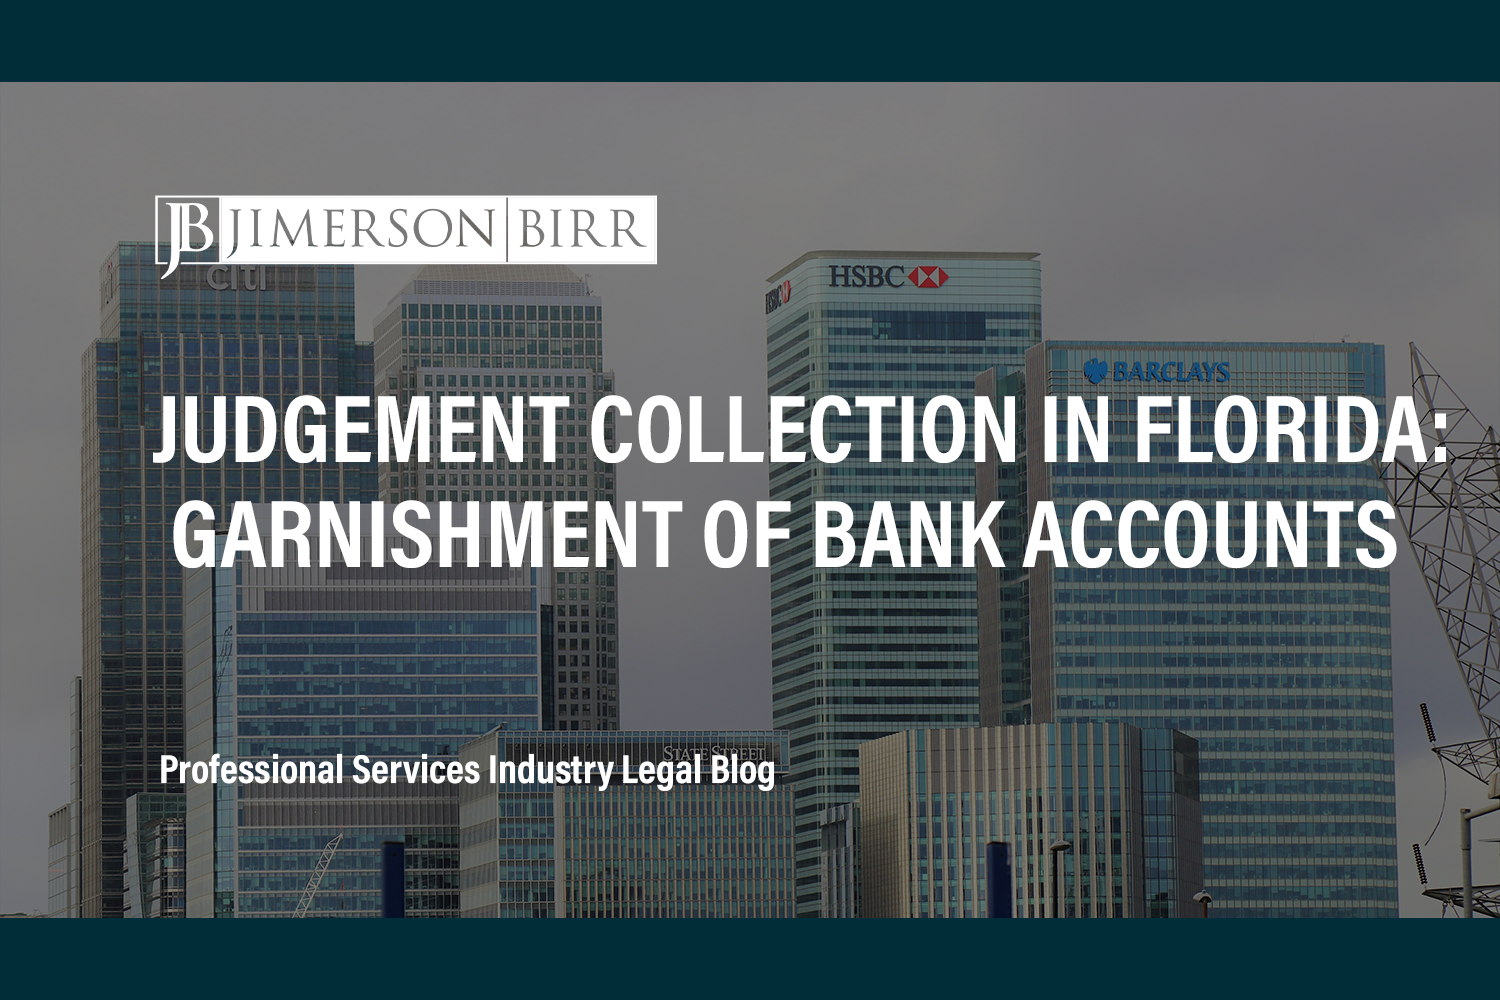 Judgement Collection in Florida: Garnishment of Bank Accounts